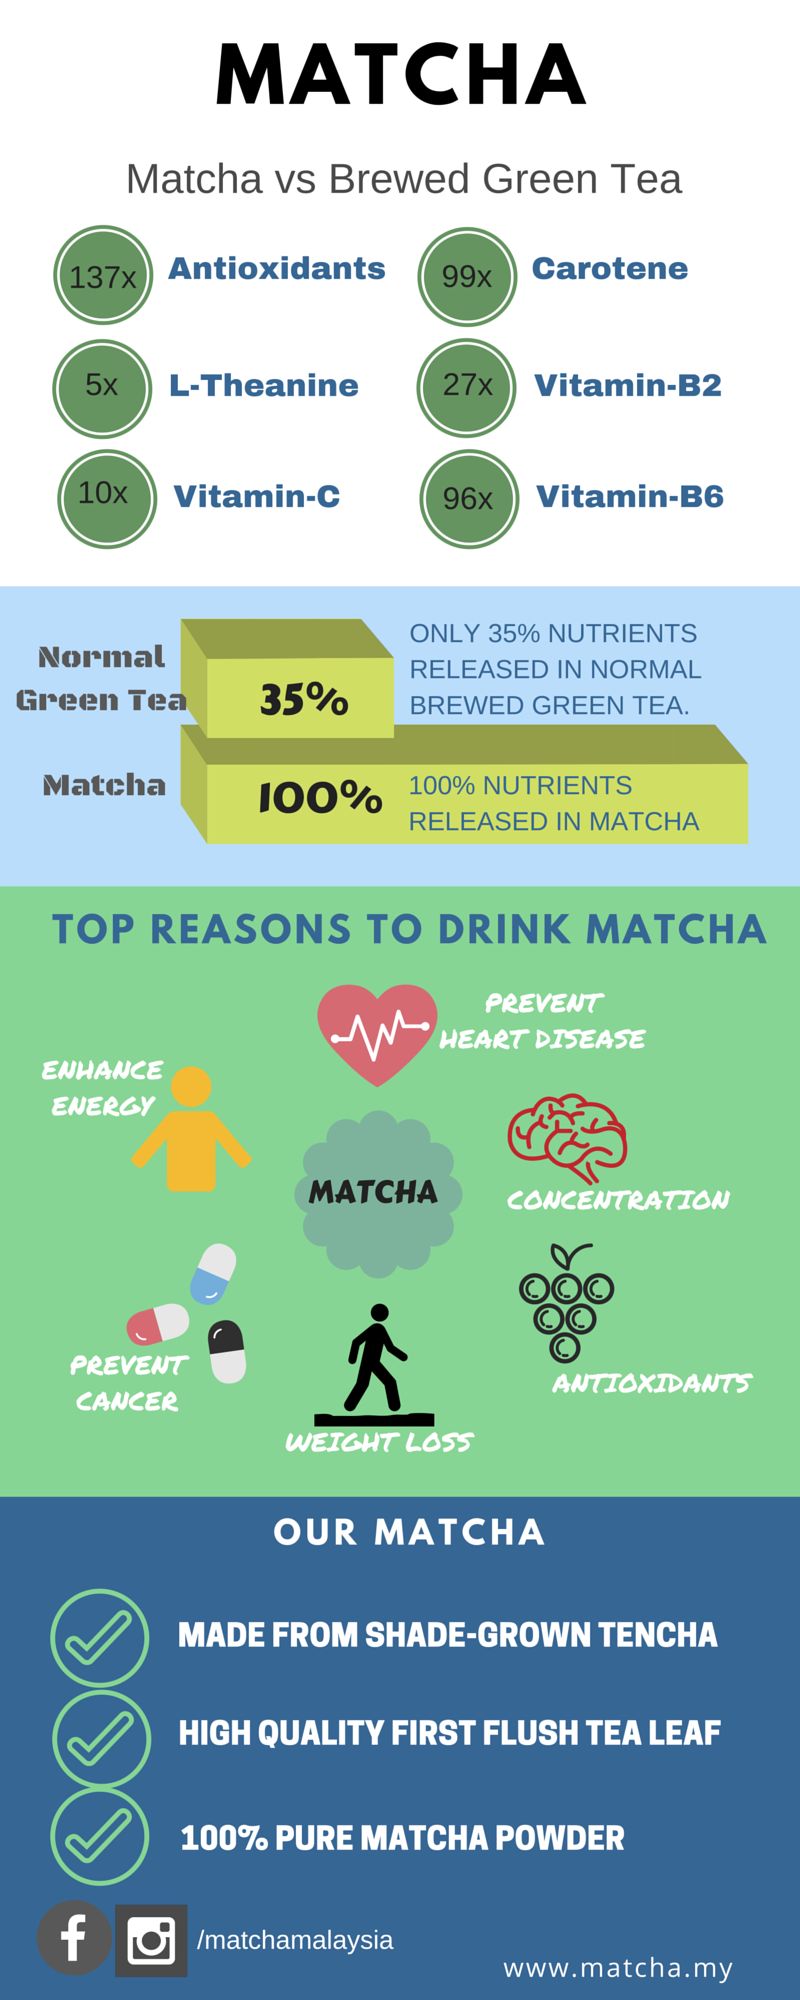 What Is Matcha? And Is It Healthy?